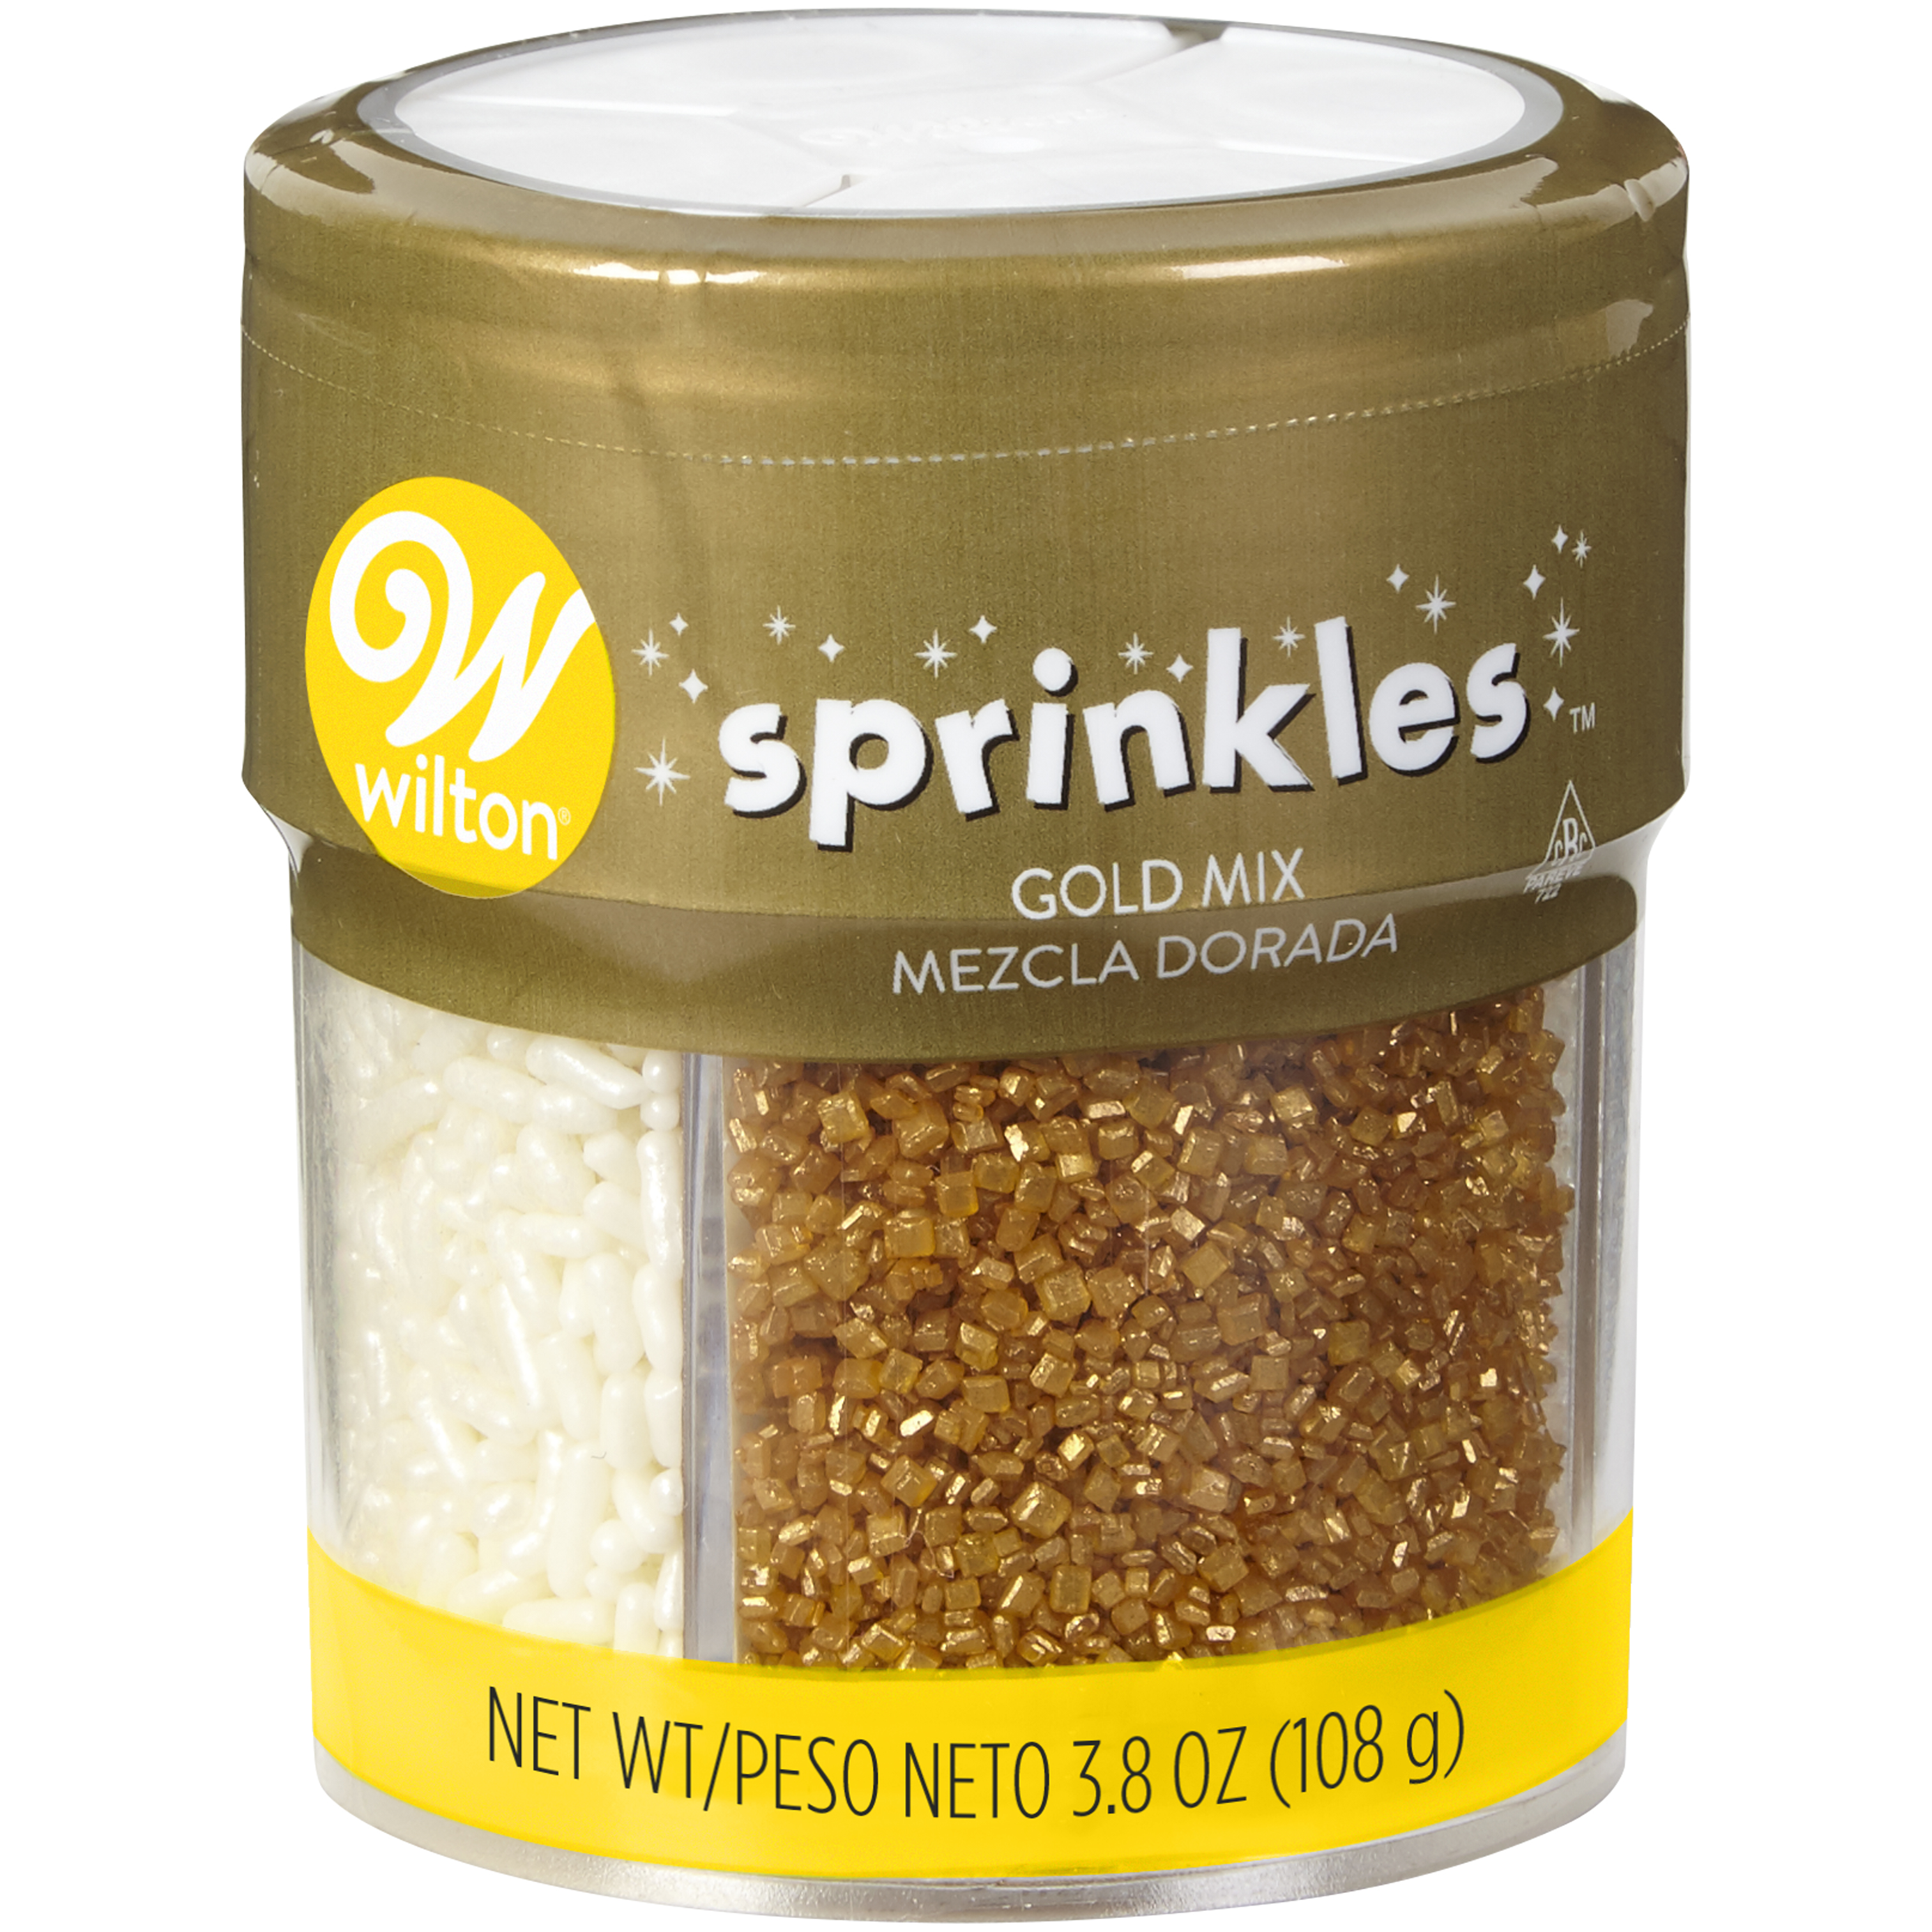 Wilton Pearlized Gold Sprinkle Assortment, 3.8 oz. - image 1 of 4